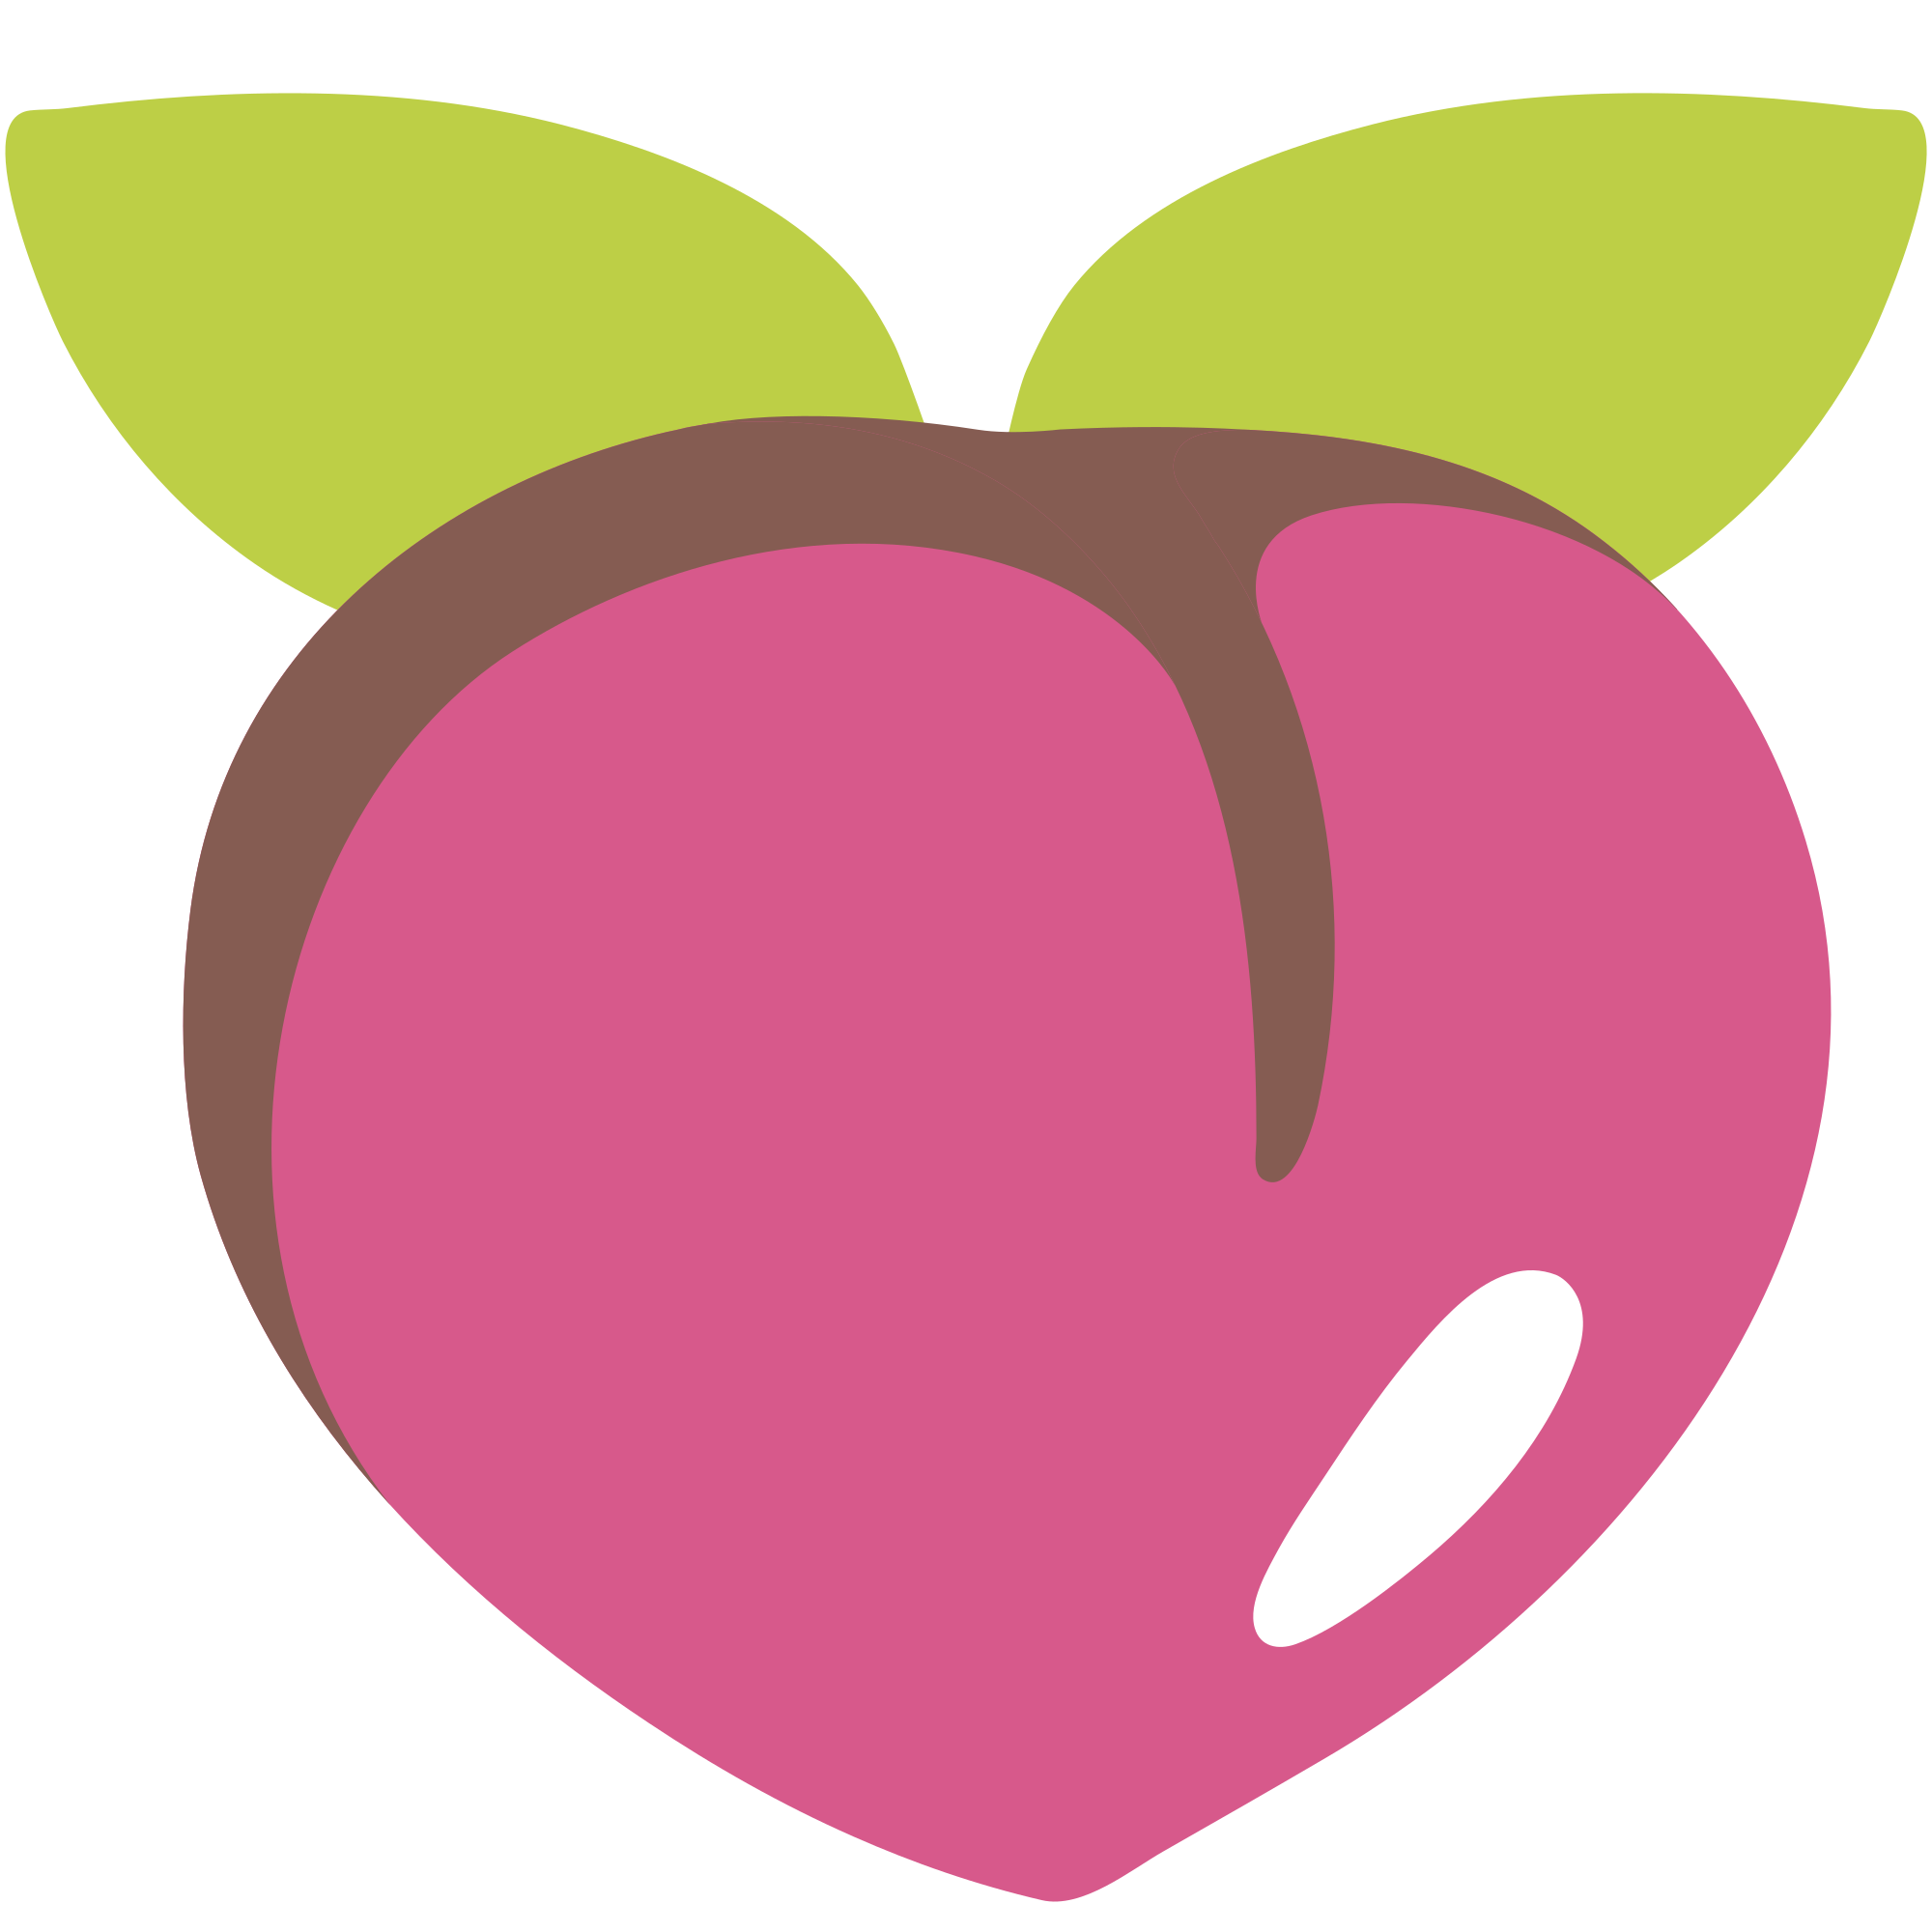 Peach svg #9, Download drawings